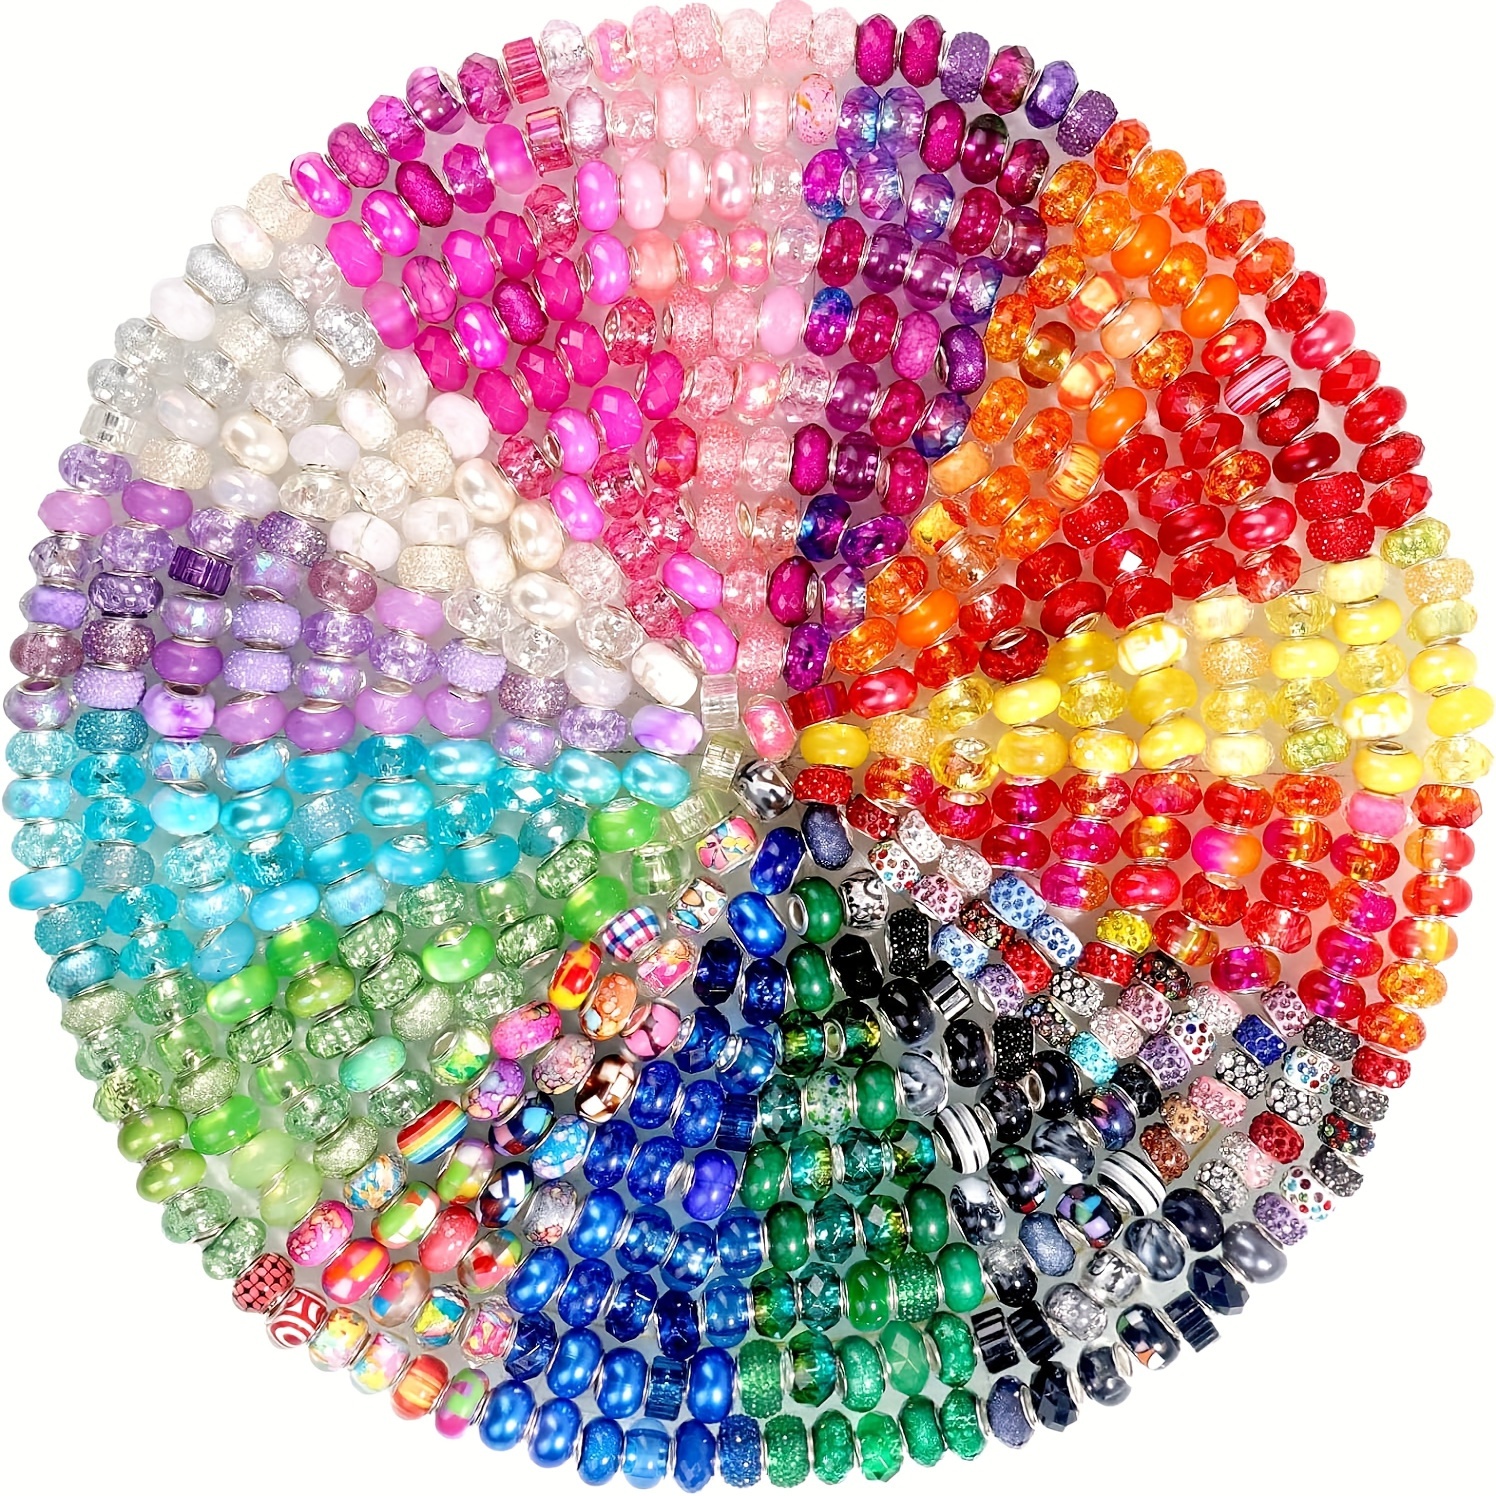 

2023 Spring Collection - 50/100pcs Assorted European-style Large Hole Beads, Mixed Colors, Crystal Glass Spacer Beads For Diy Bracelets & Necklaces Jewelry Crafting